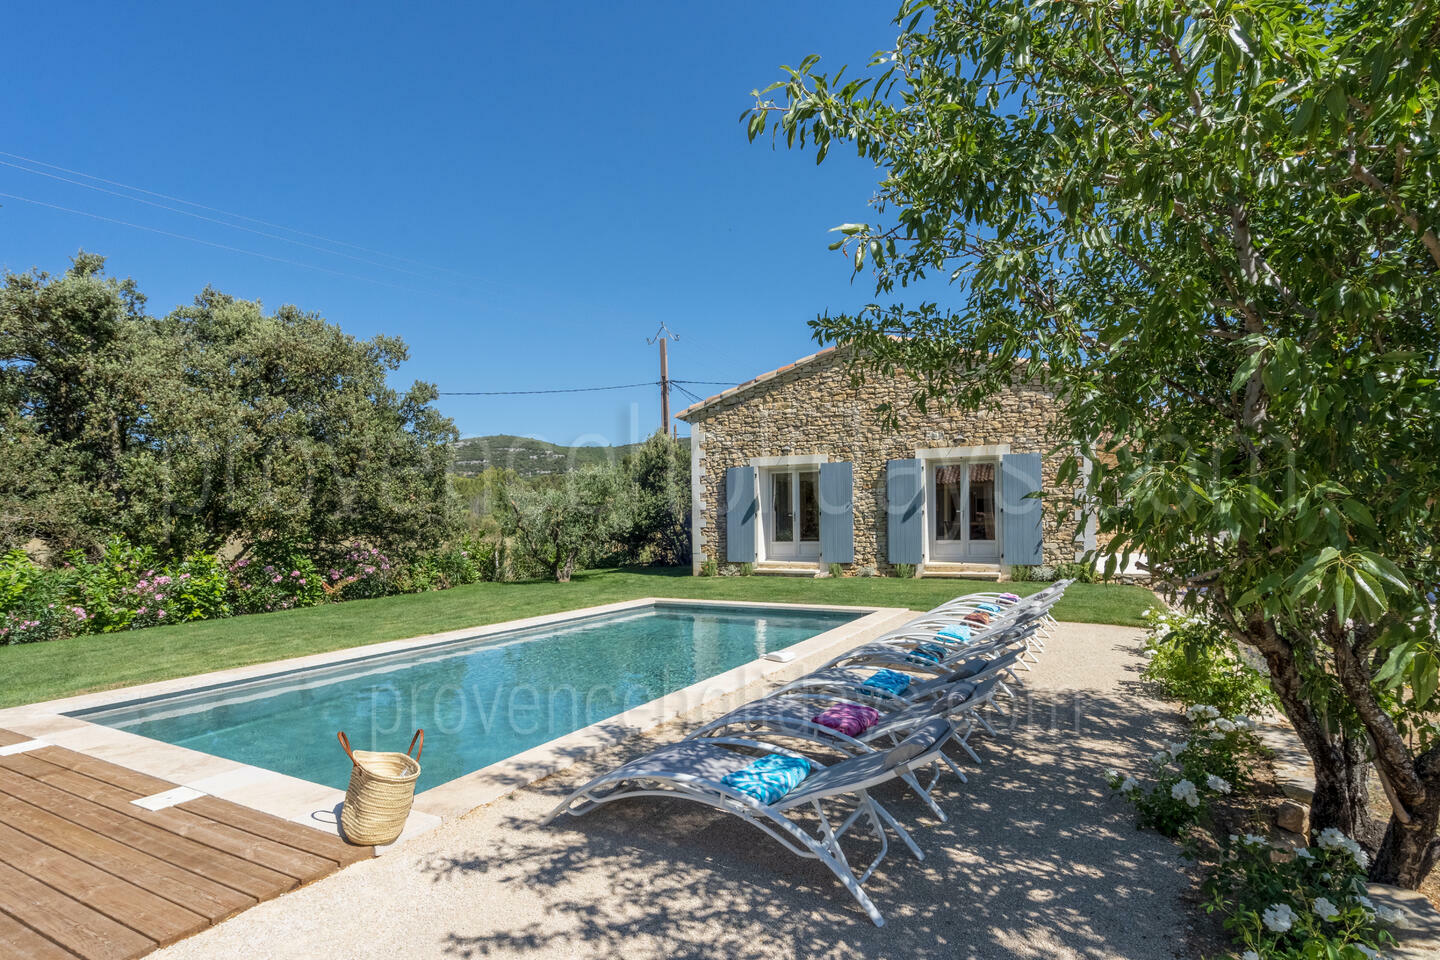 Stone villa,  newly constructed with a swimming pool located just outside the charming village of Murs Stone villa,  newly constructed with a swimming pool located just outside the charming village of Murs - -2